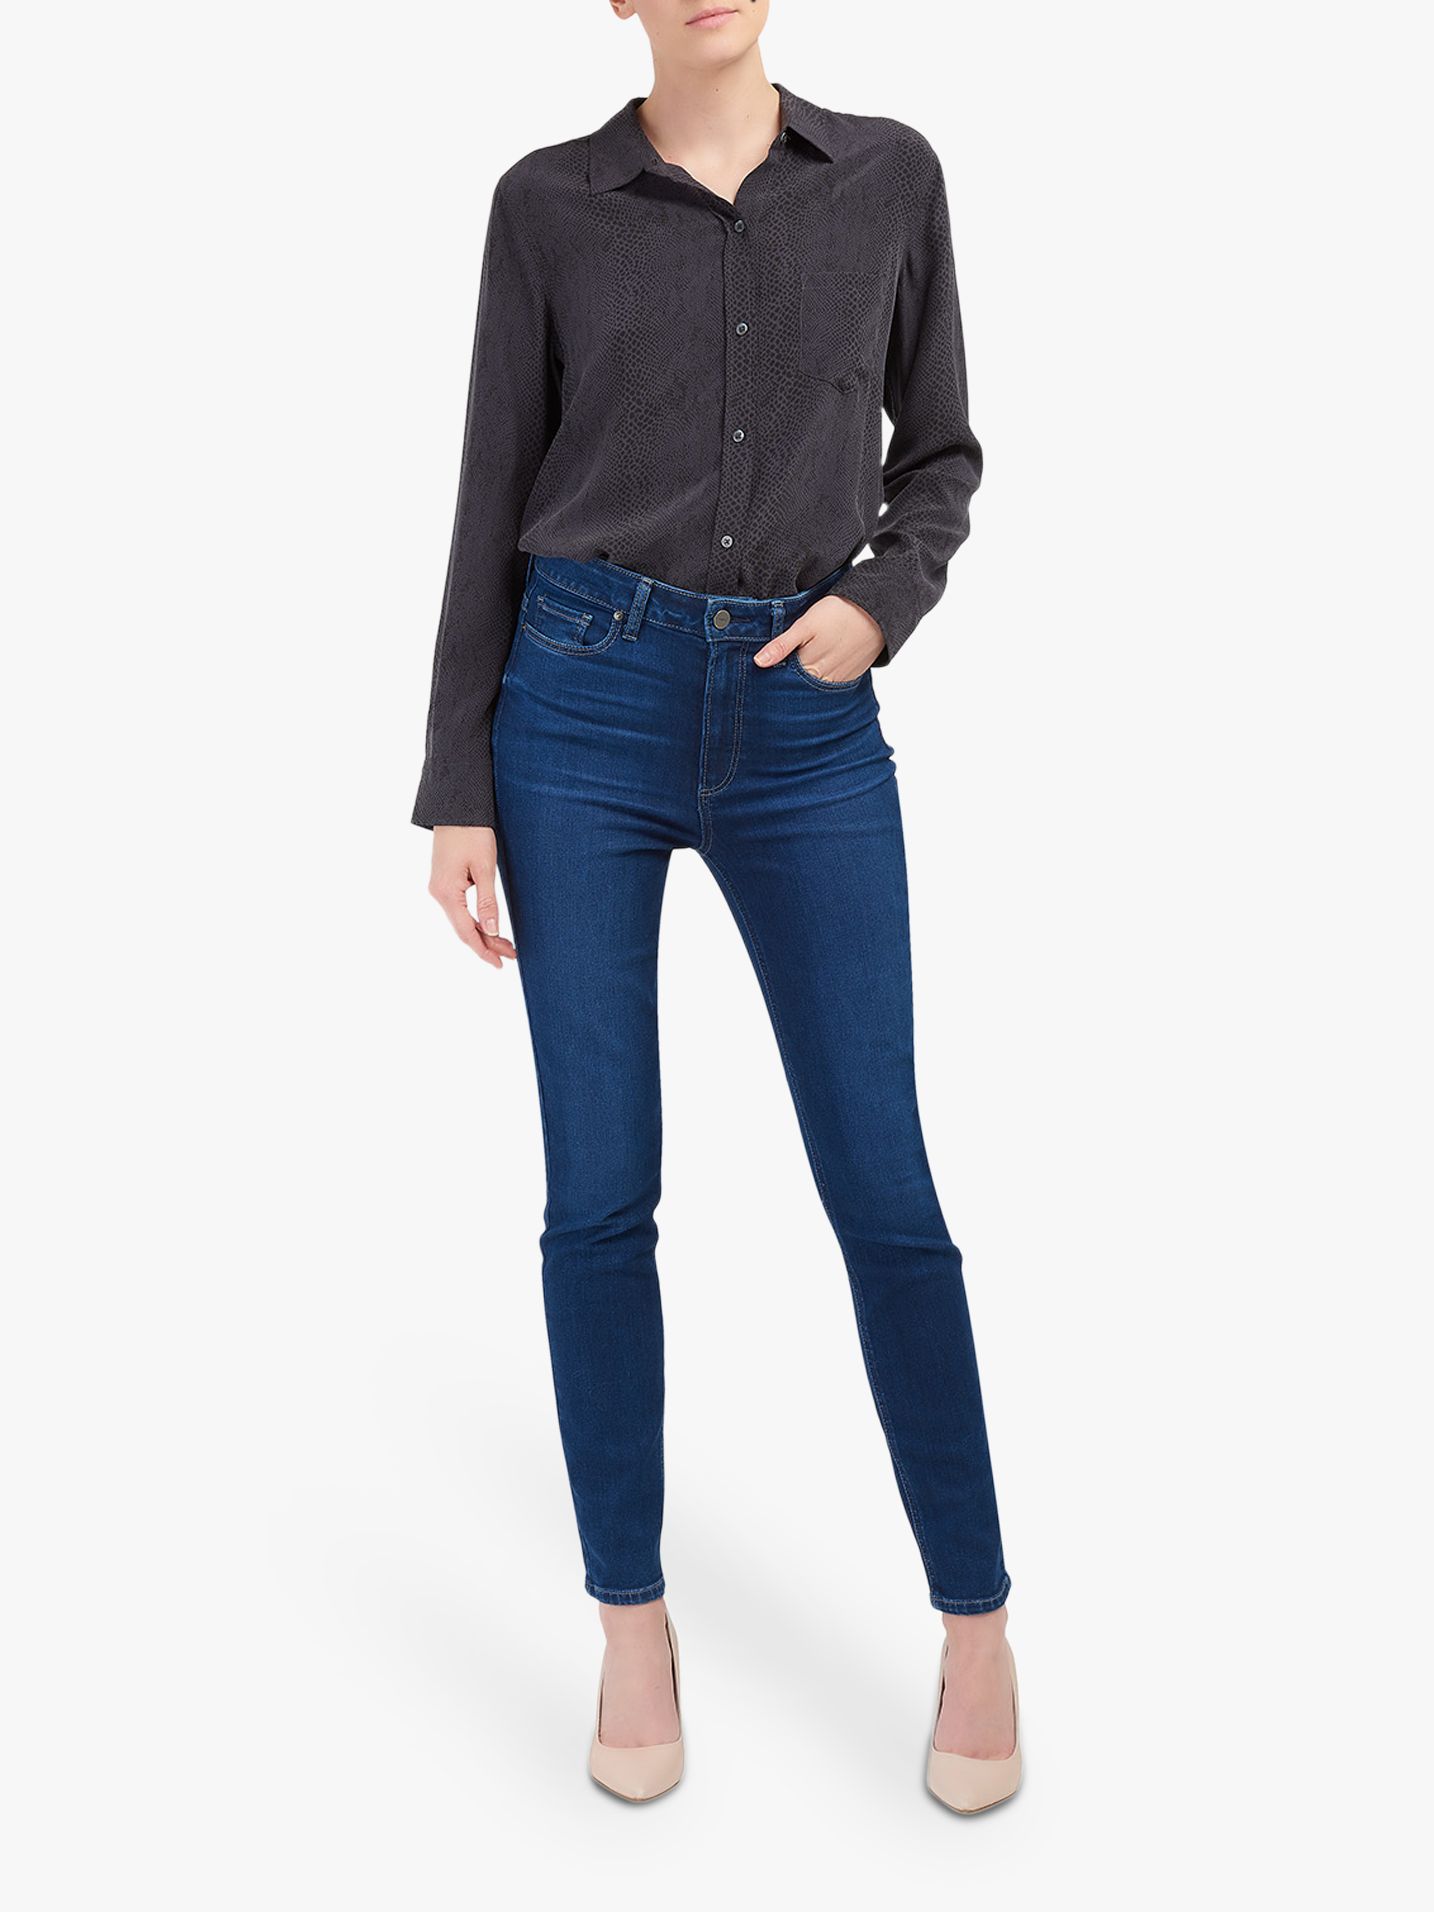 PAIGE Margot High Rise Ultra Skinny Jeans, Brentwood Mid Wash at John ...